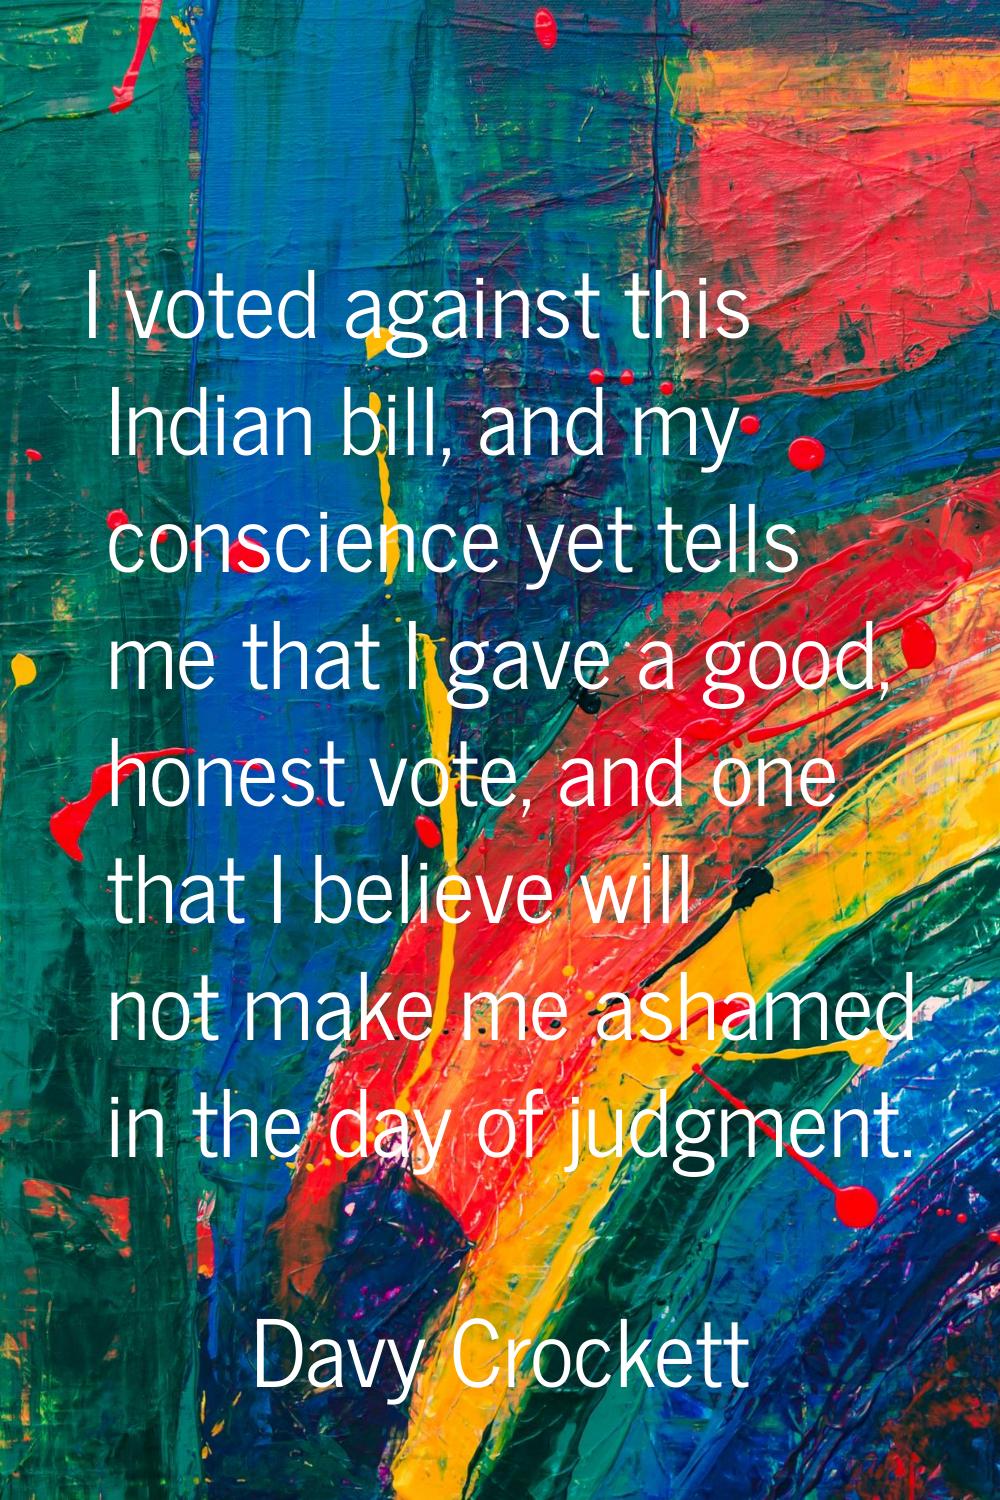 I voted against this Indian bill, and my conscience yet tells me that I gave a good, honest vote, a